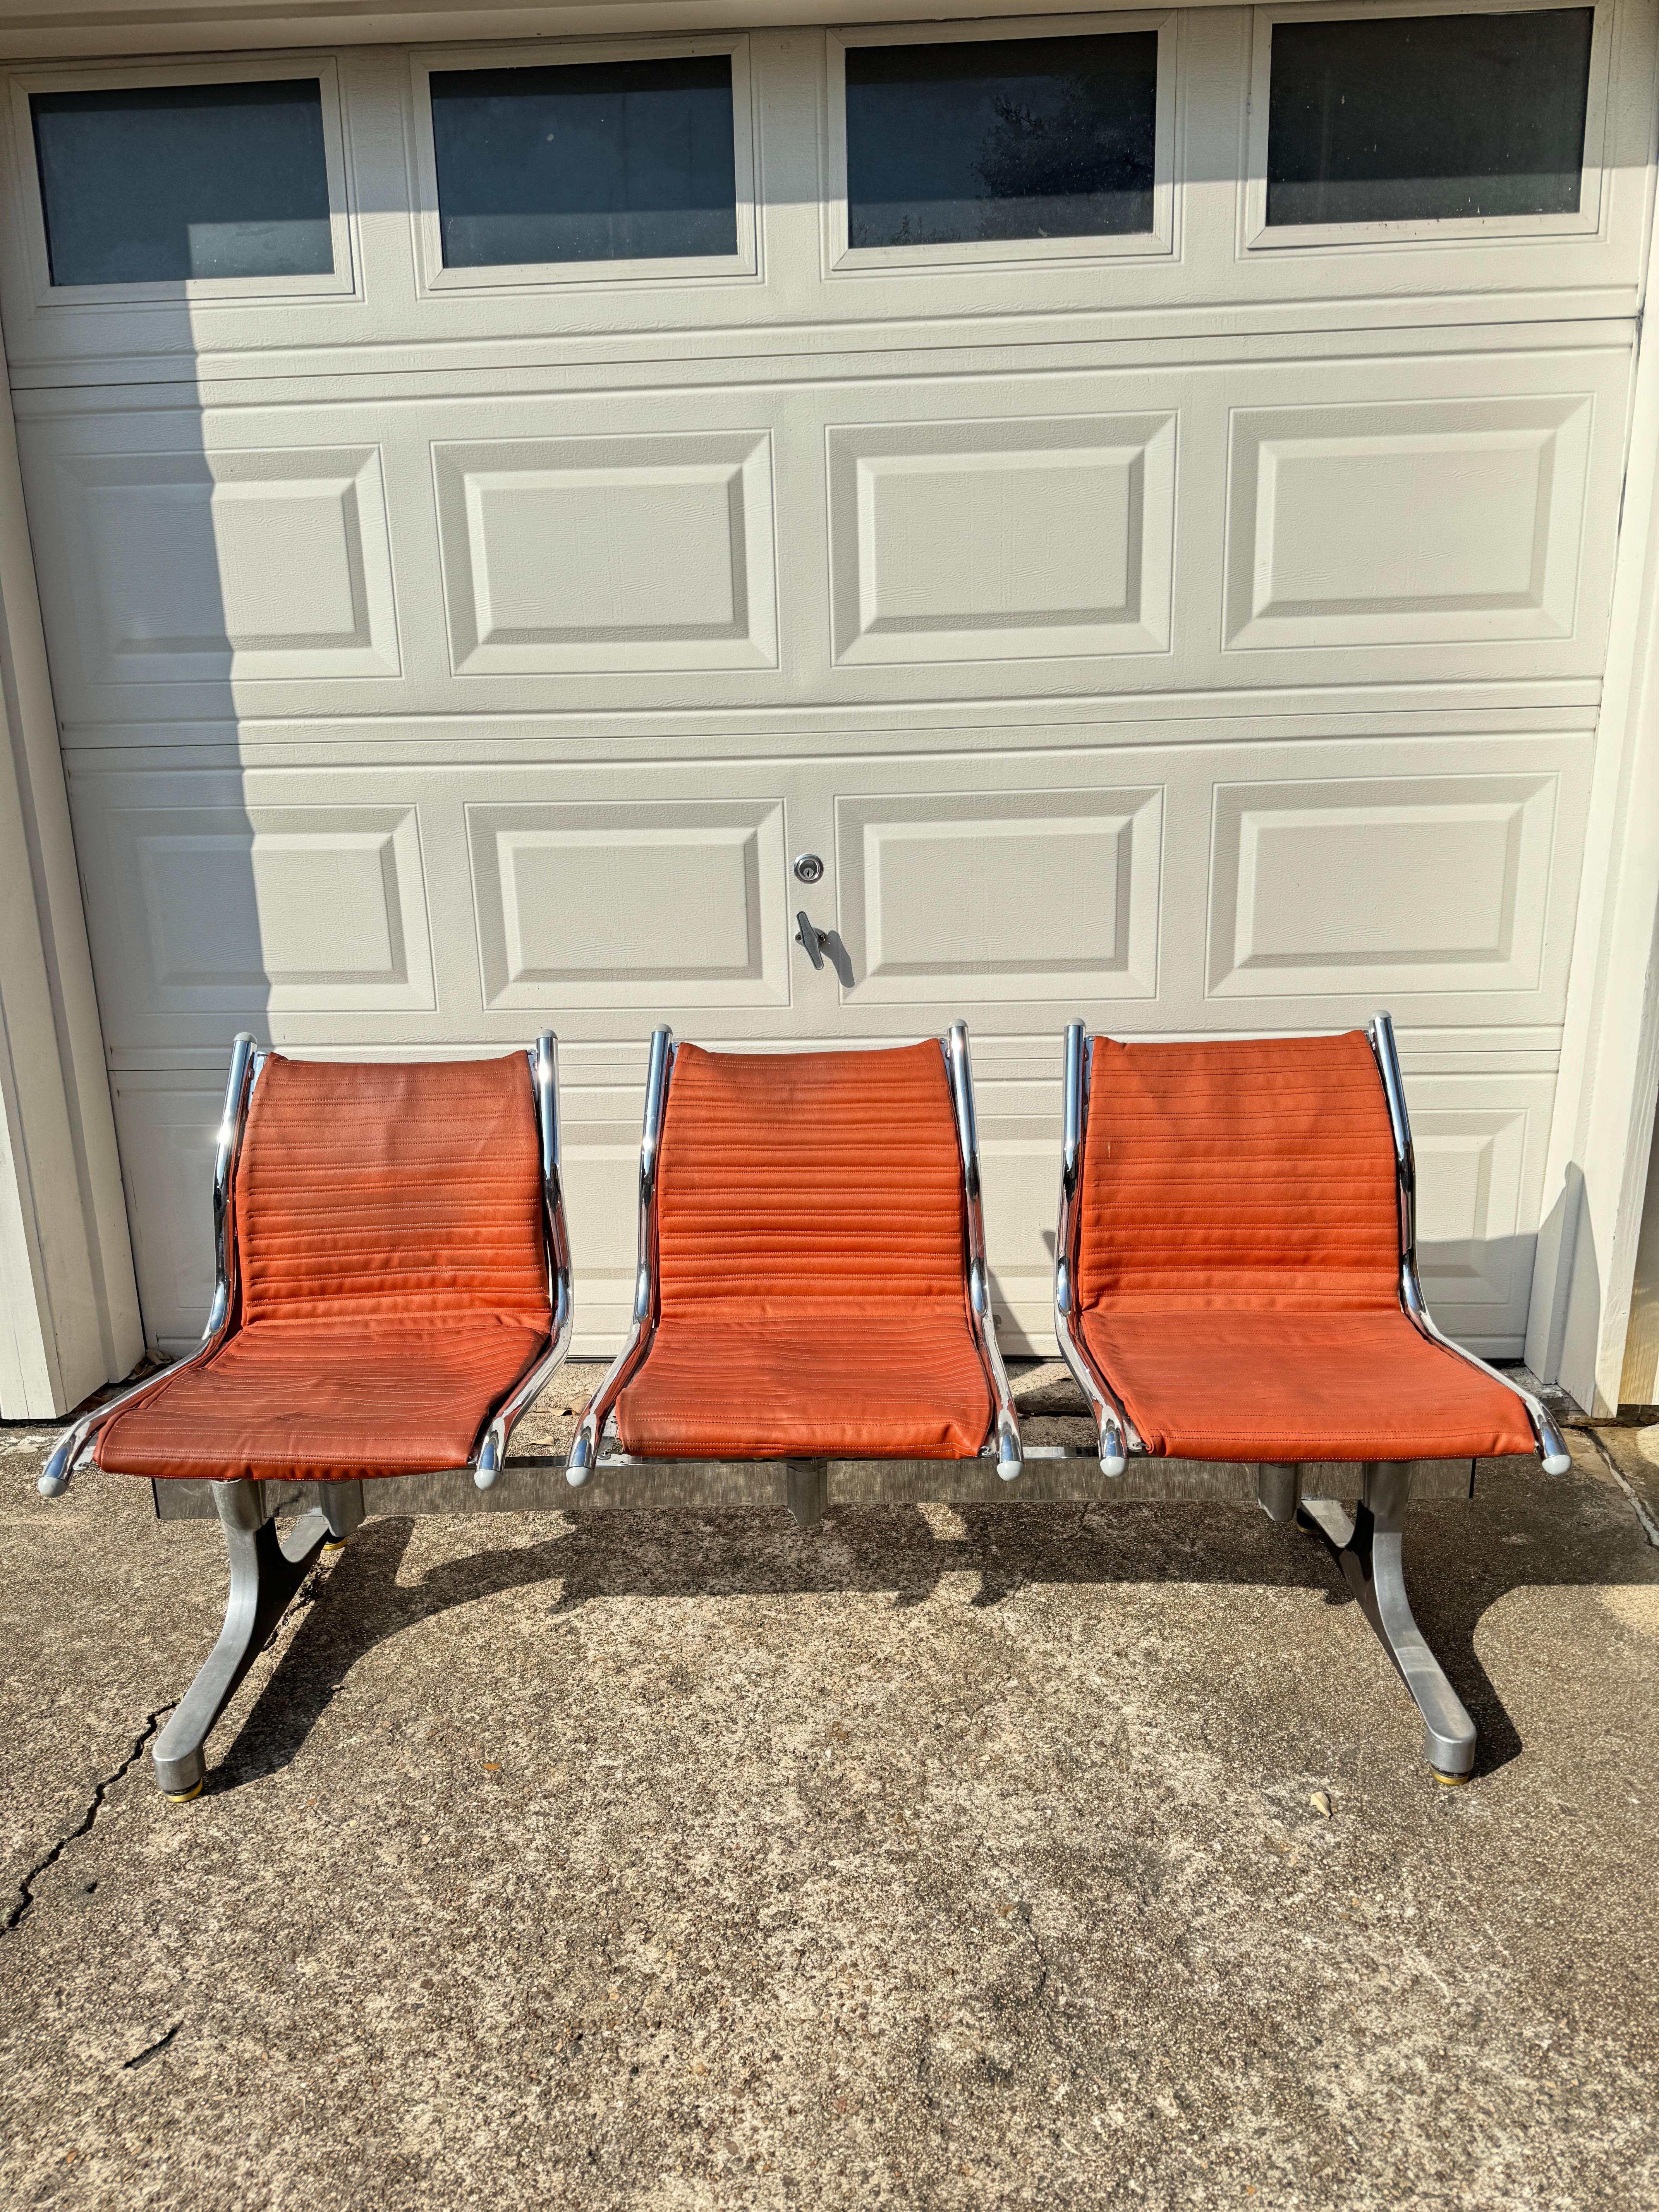 Retro 3 seater leather bench in the style of Herman Miller, circa 1970’s. Can be used for living room seating, or even porch seating. In good original condition and structurally sound. Seating has some minor discoloration but no rips or tears. 

65”